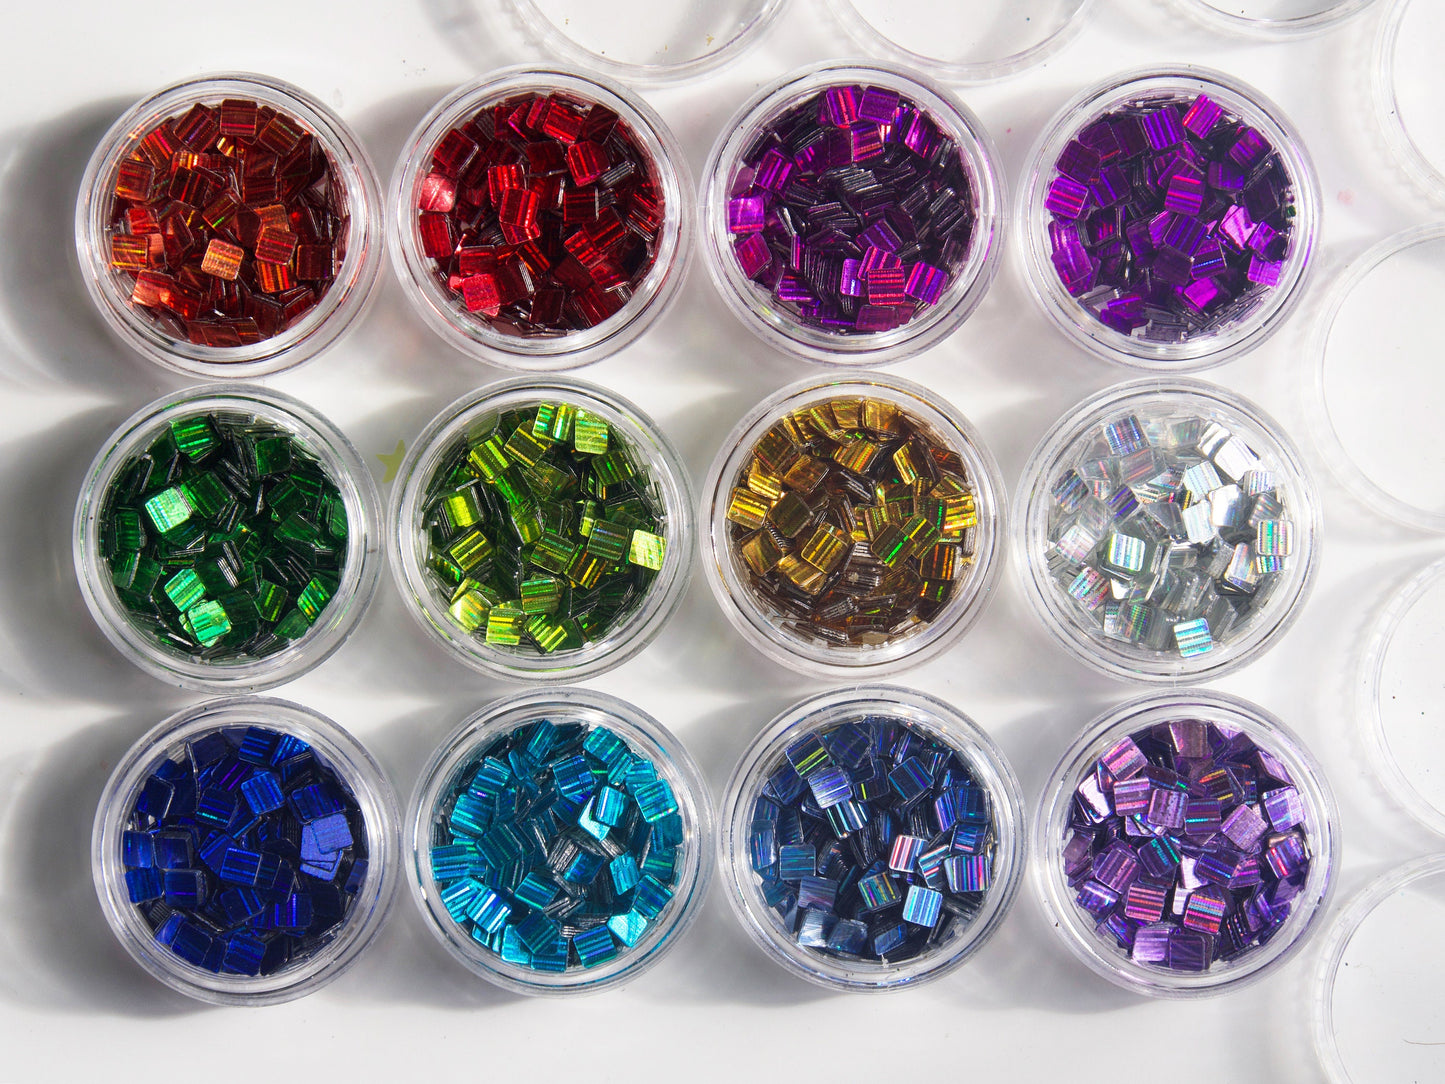 12 jars Square Laser Glitter Chips/ Iridescent Nail Flakes 3D DIY Sequins/Metallic Colors Halo Quadrate Glitters Craft Manicure Supply